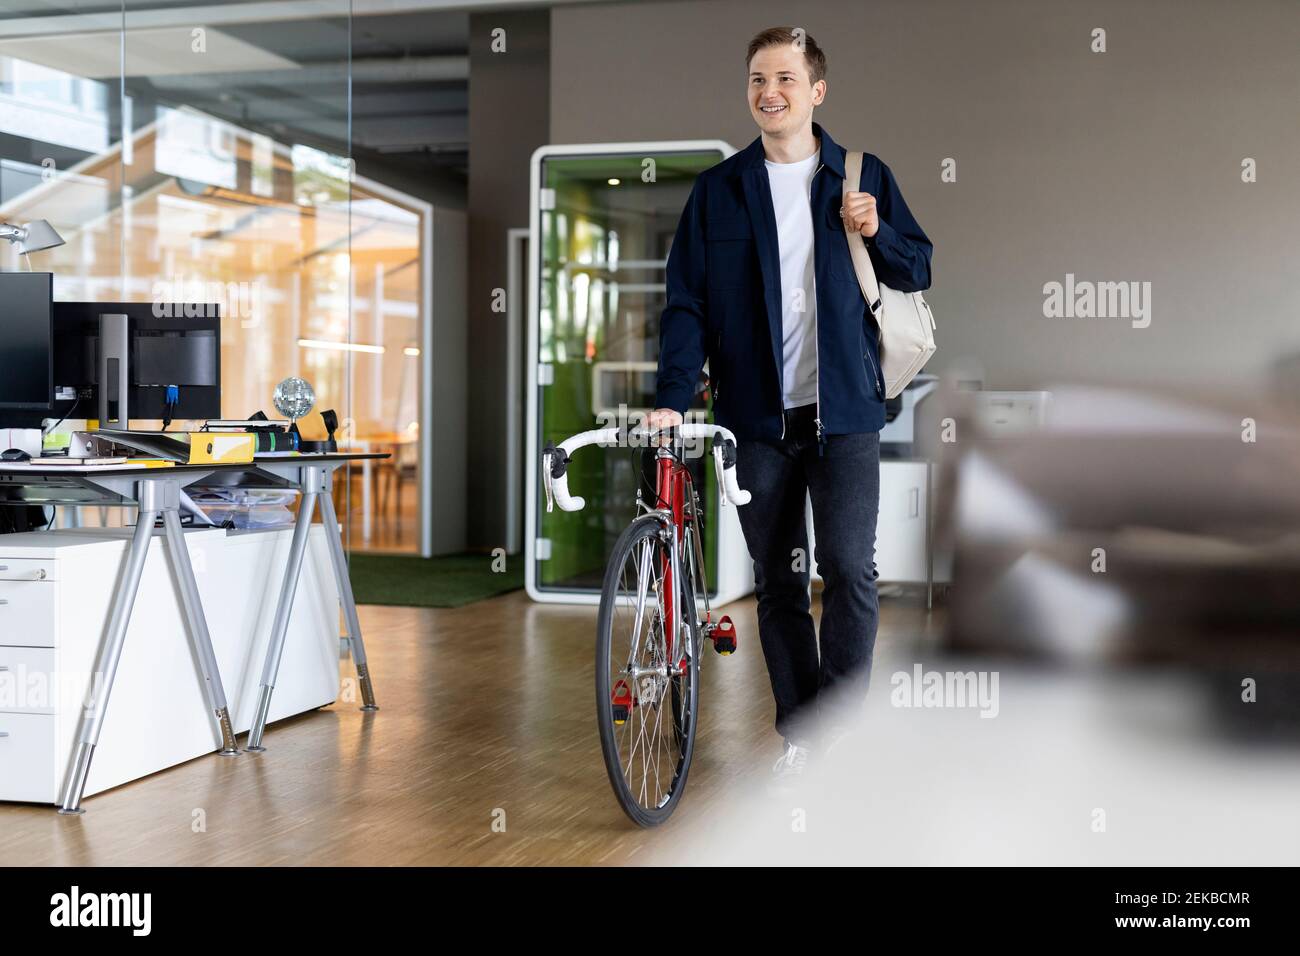 Smiling businessman with bag and bicycle walking while leaving after work from office Stock Photo